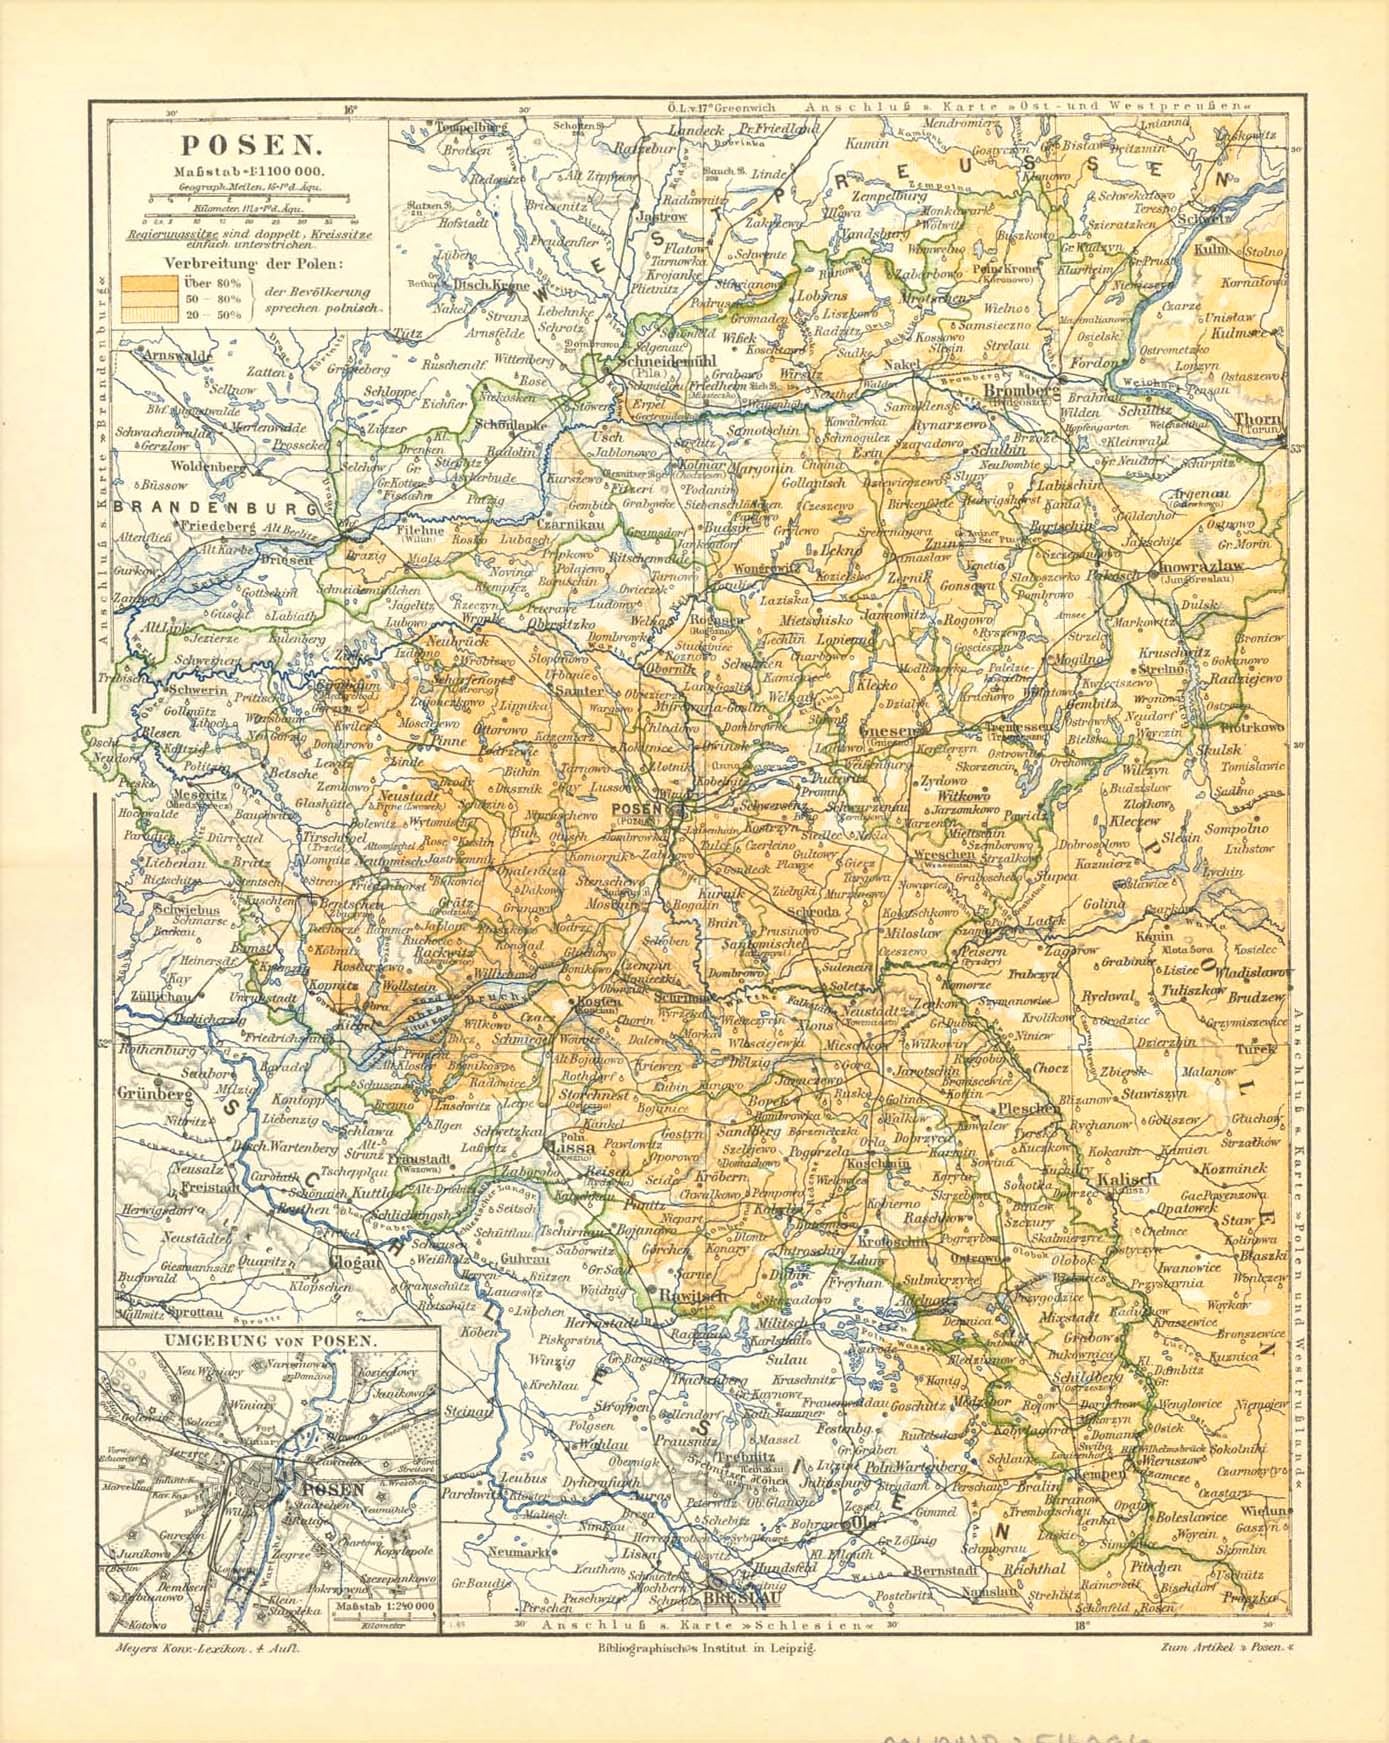 Maps, Poland, Posen, "Posen" (Poznan)  The province of Poznan with a little inset of the city of Poznan and its surroundings.  Chromo-lithograph  Published in Leipzig, 1893  Original antique print   For a 30% discount enter MAPS30 at chekout